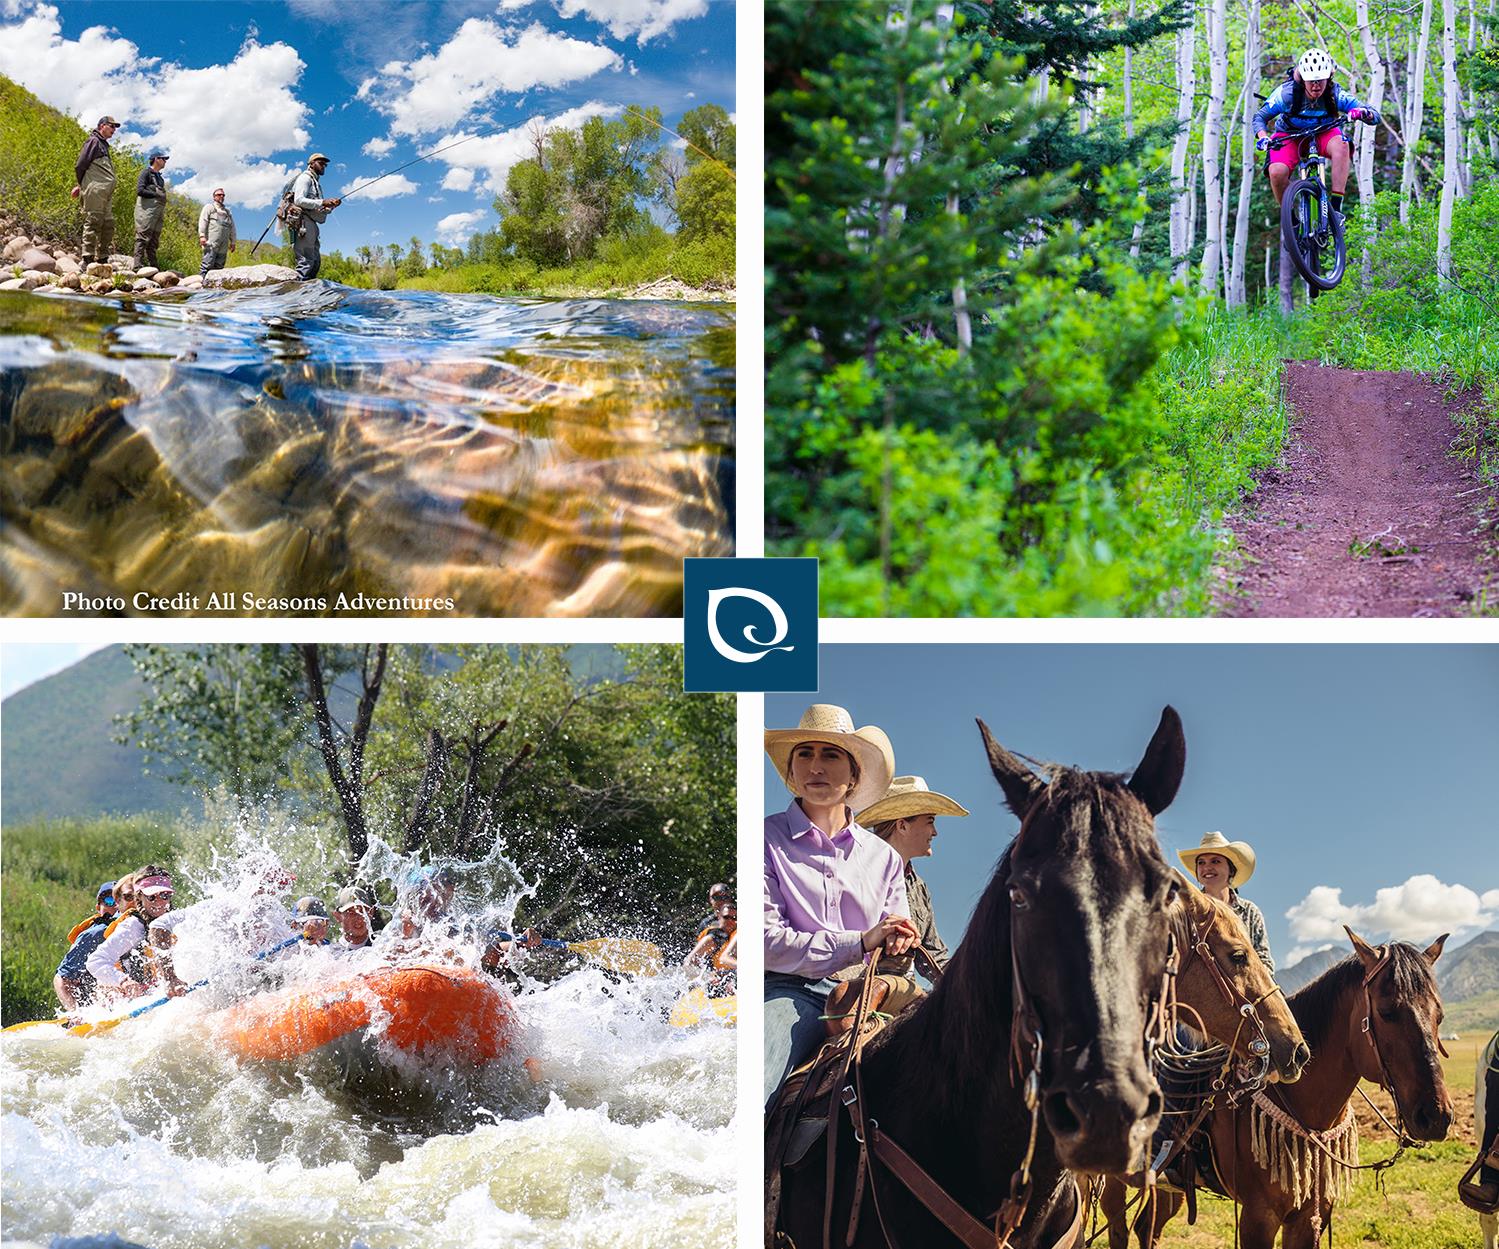 4 pictures of different activities  horseback riders, river rafters, mountain biker and fly fishing